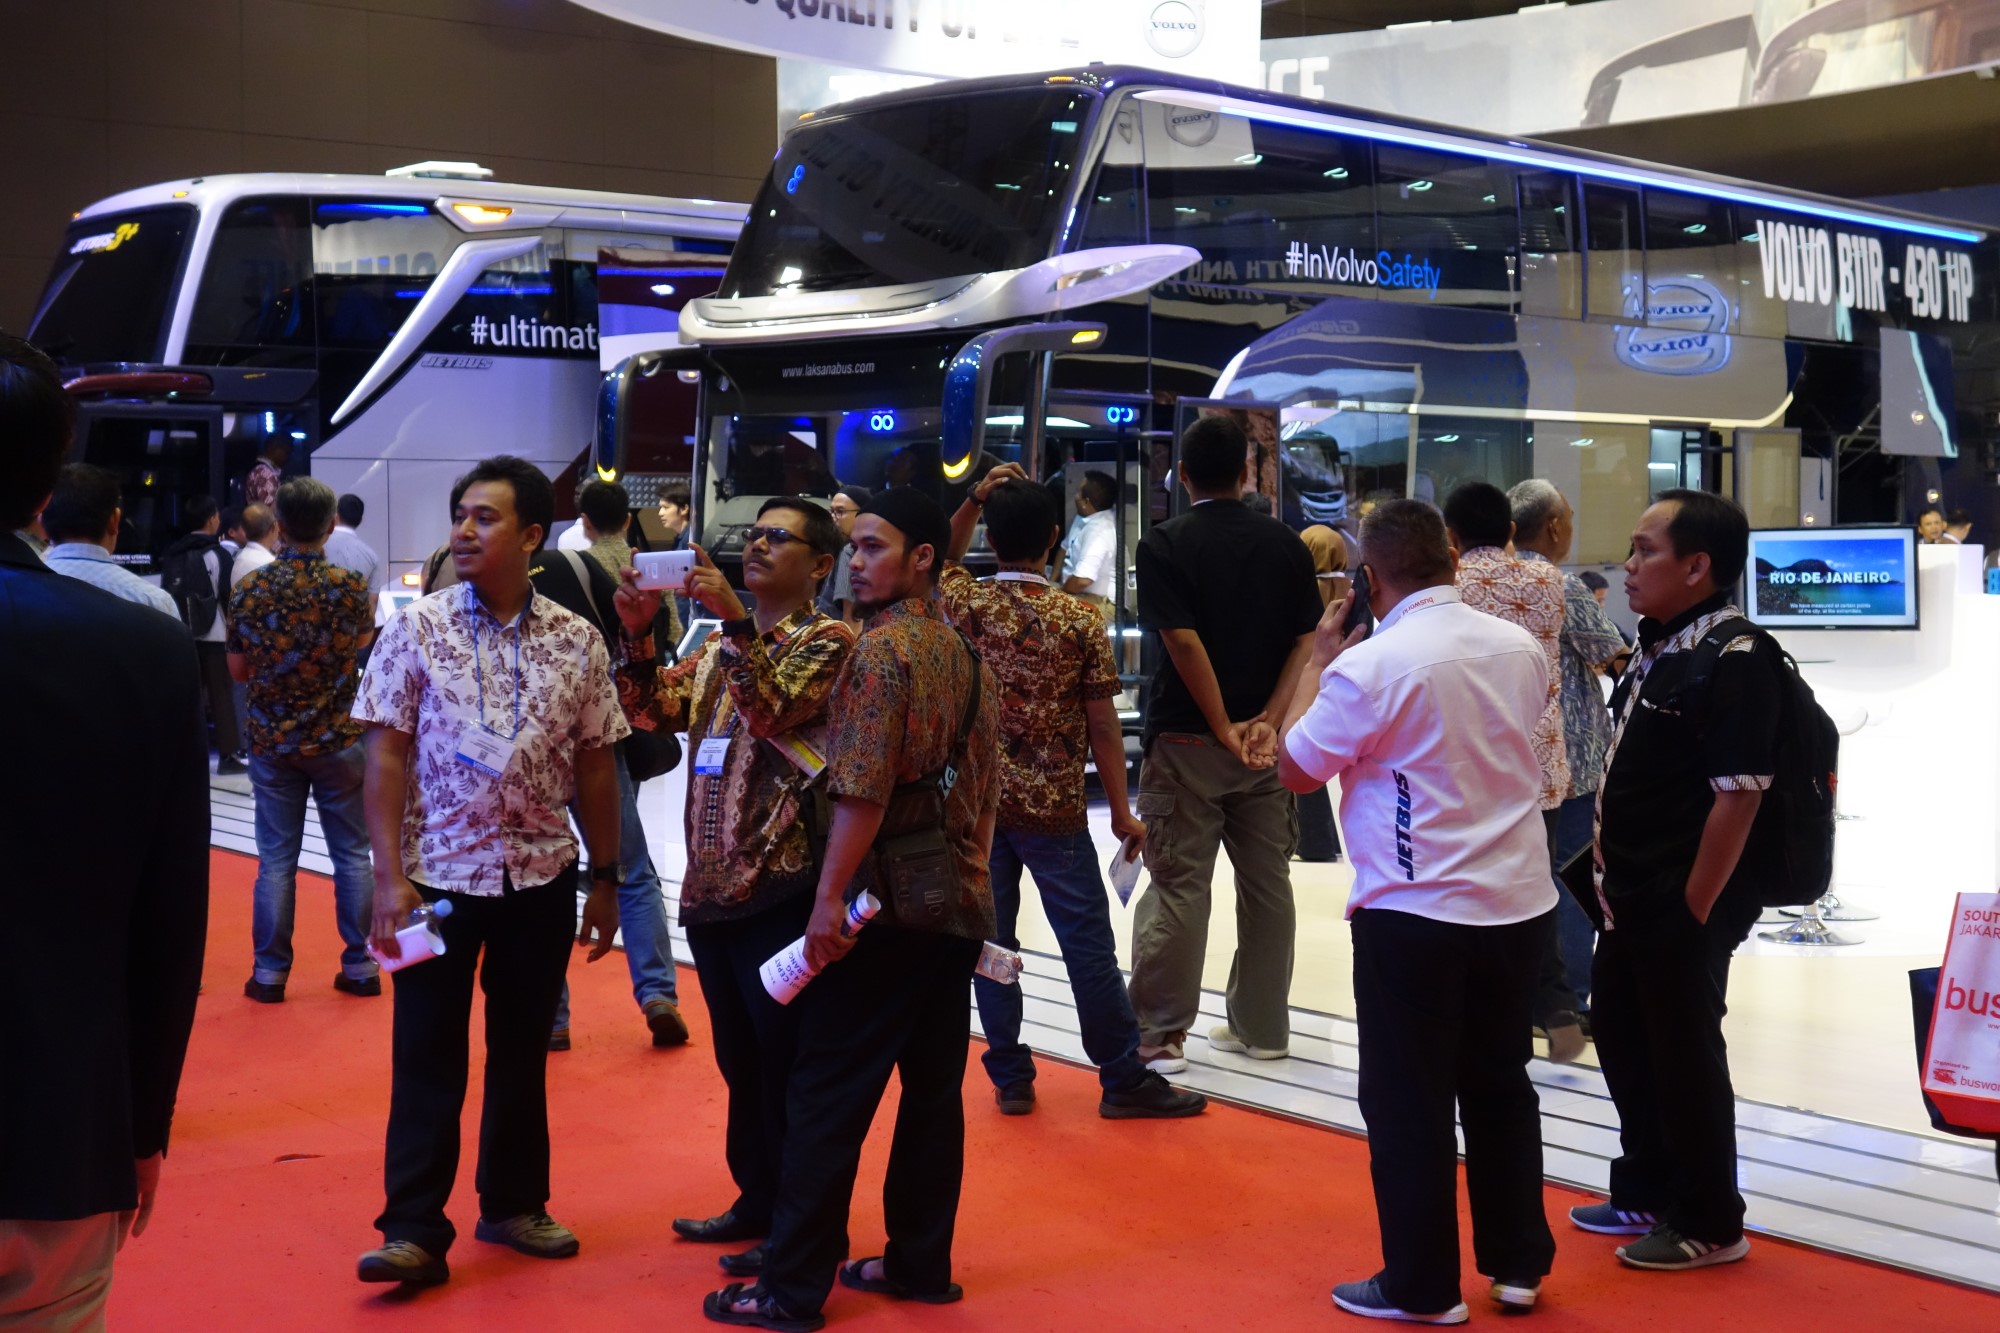 Atmosphere at Busworld SEA